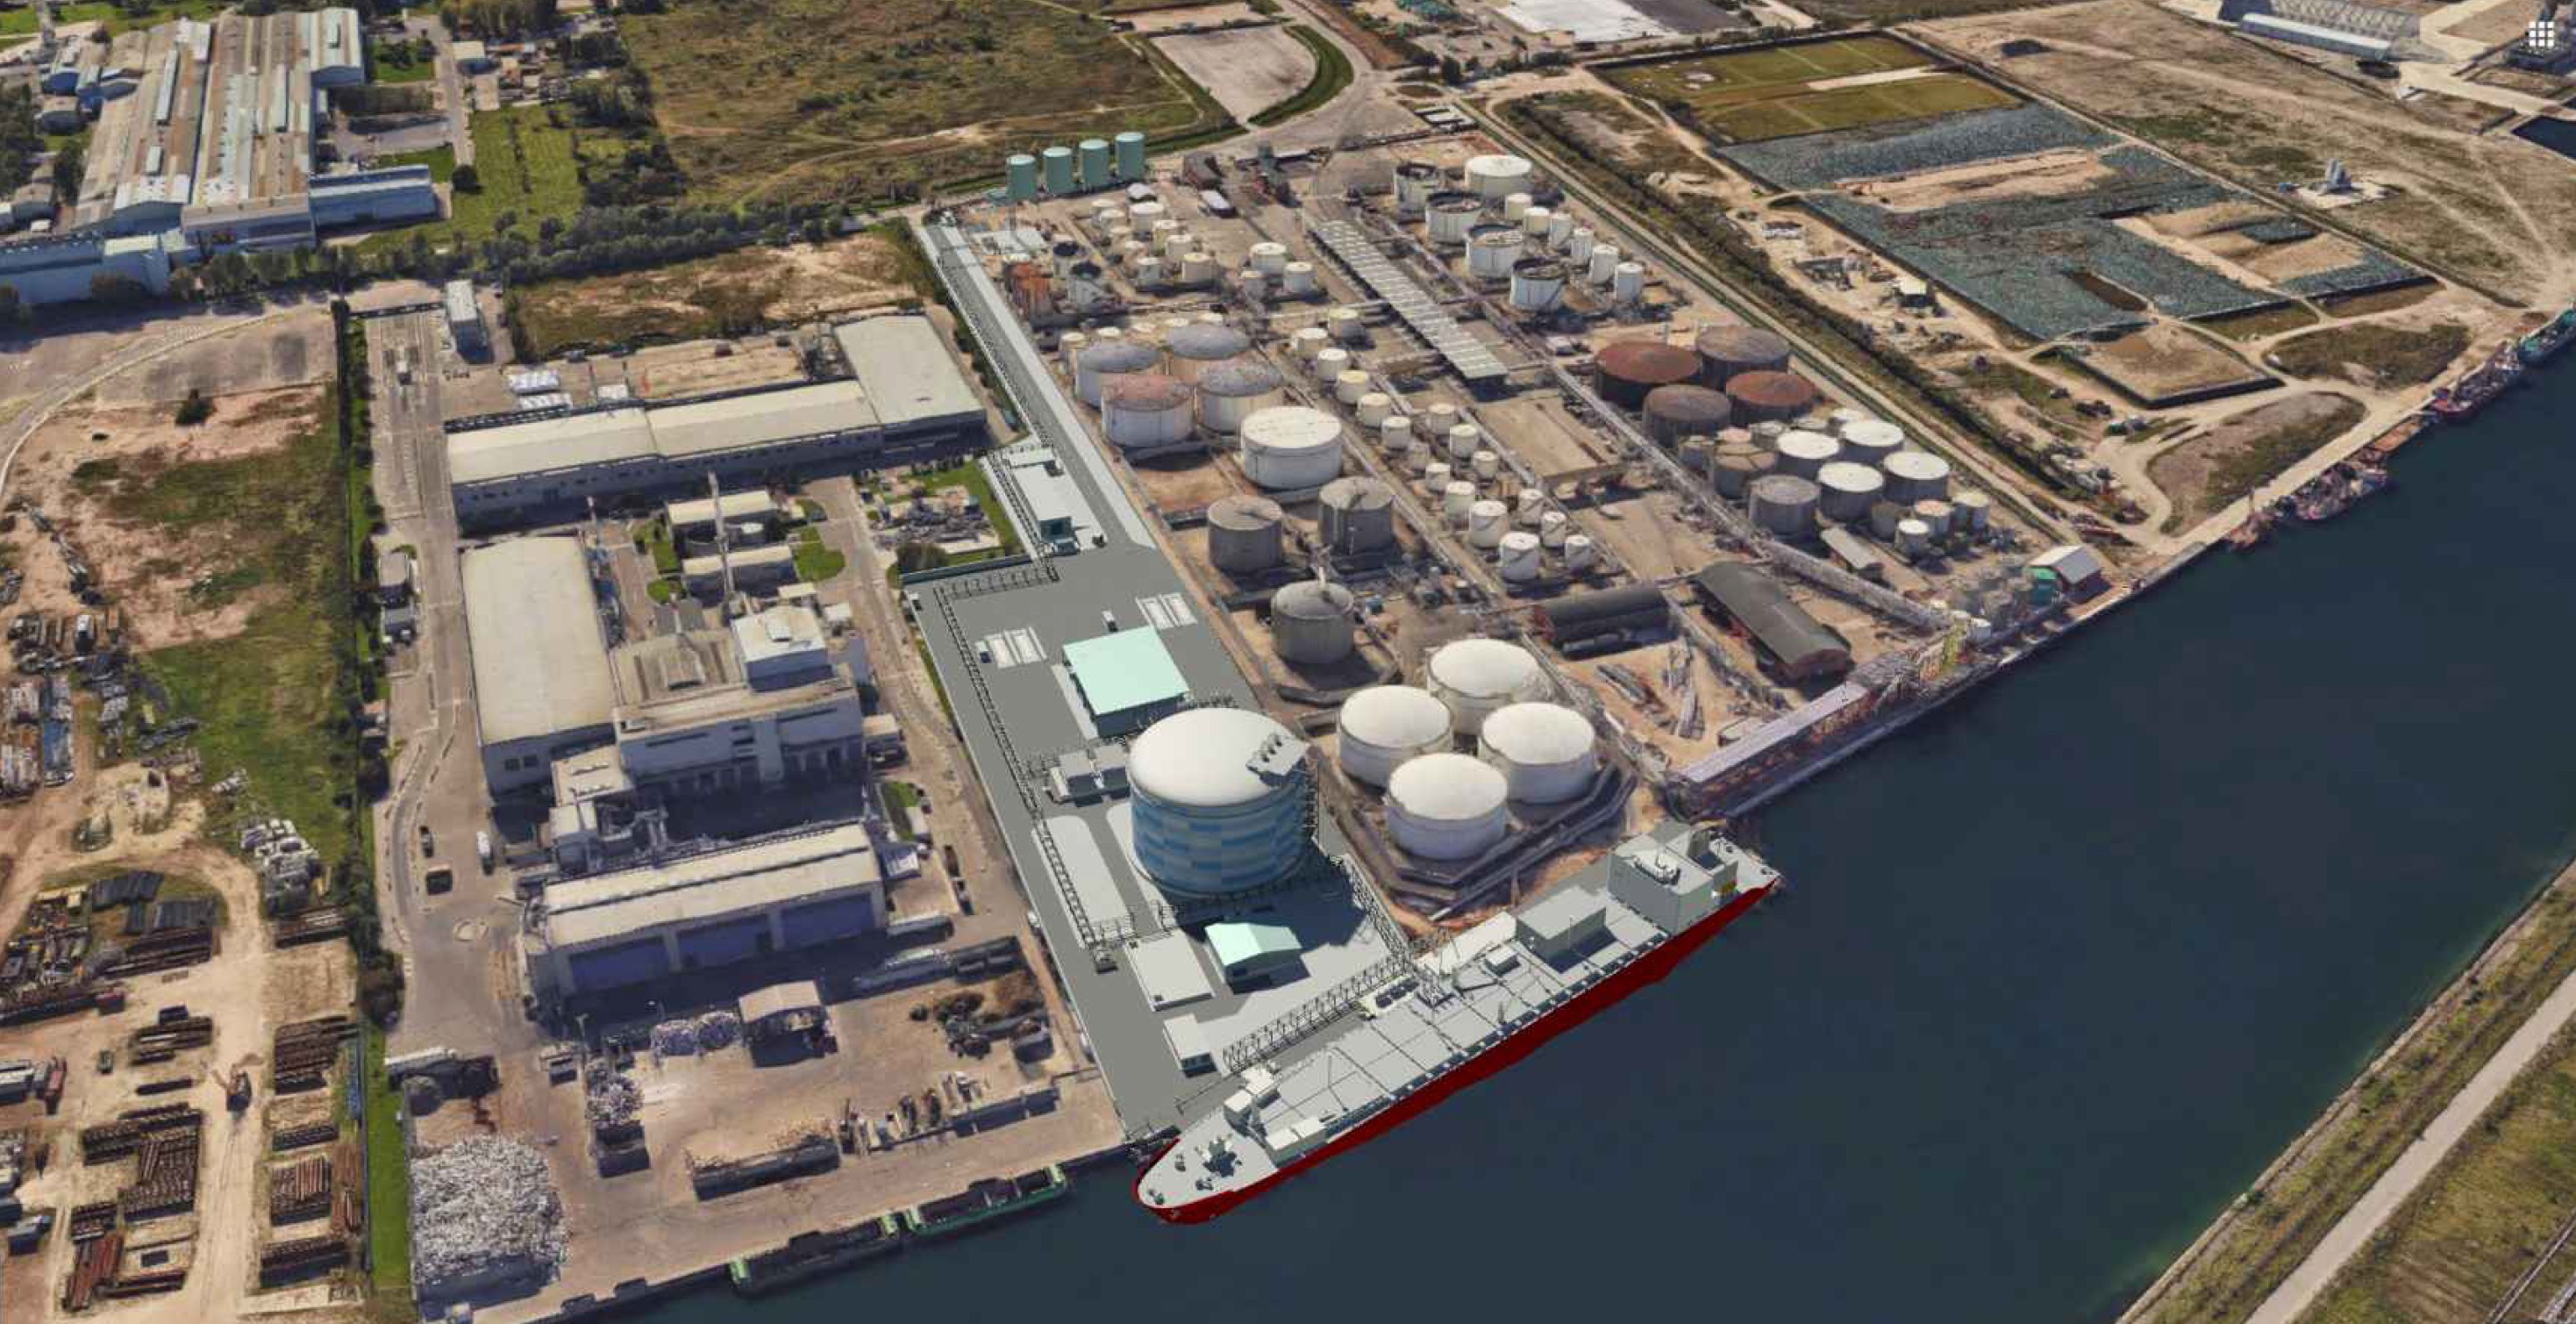 Venice LNG gets authorised for LNG storage terminal